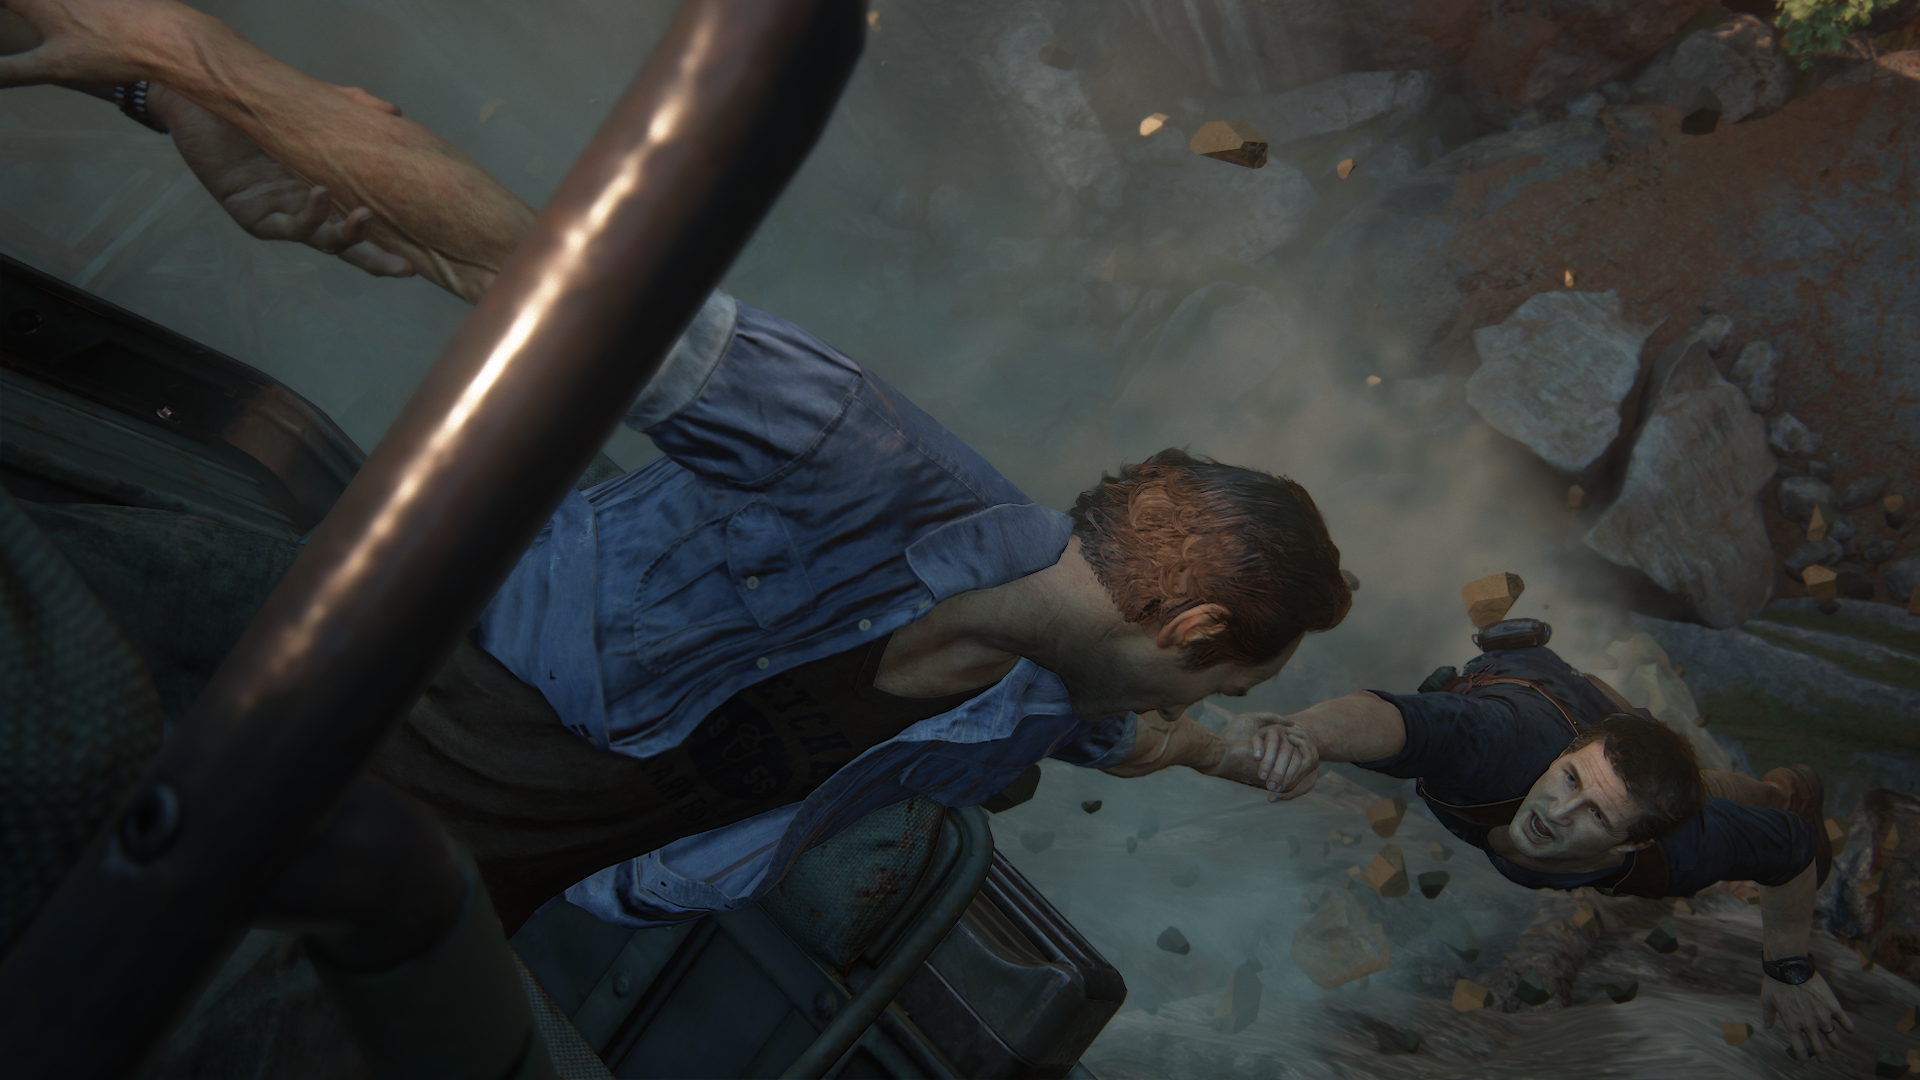 Thief's den. Uncharted 4. Uncharted 4: a Thief’s end. Анчартед 4 Скриншоты. Дрейк путь вора.